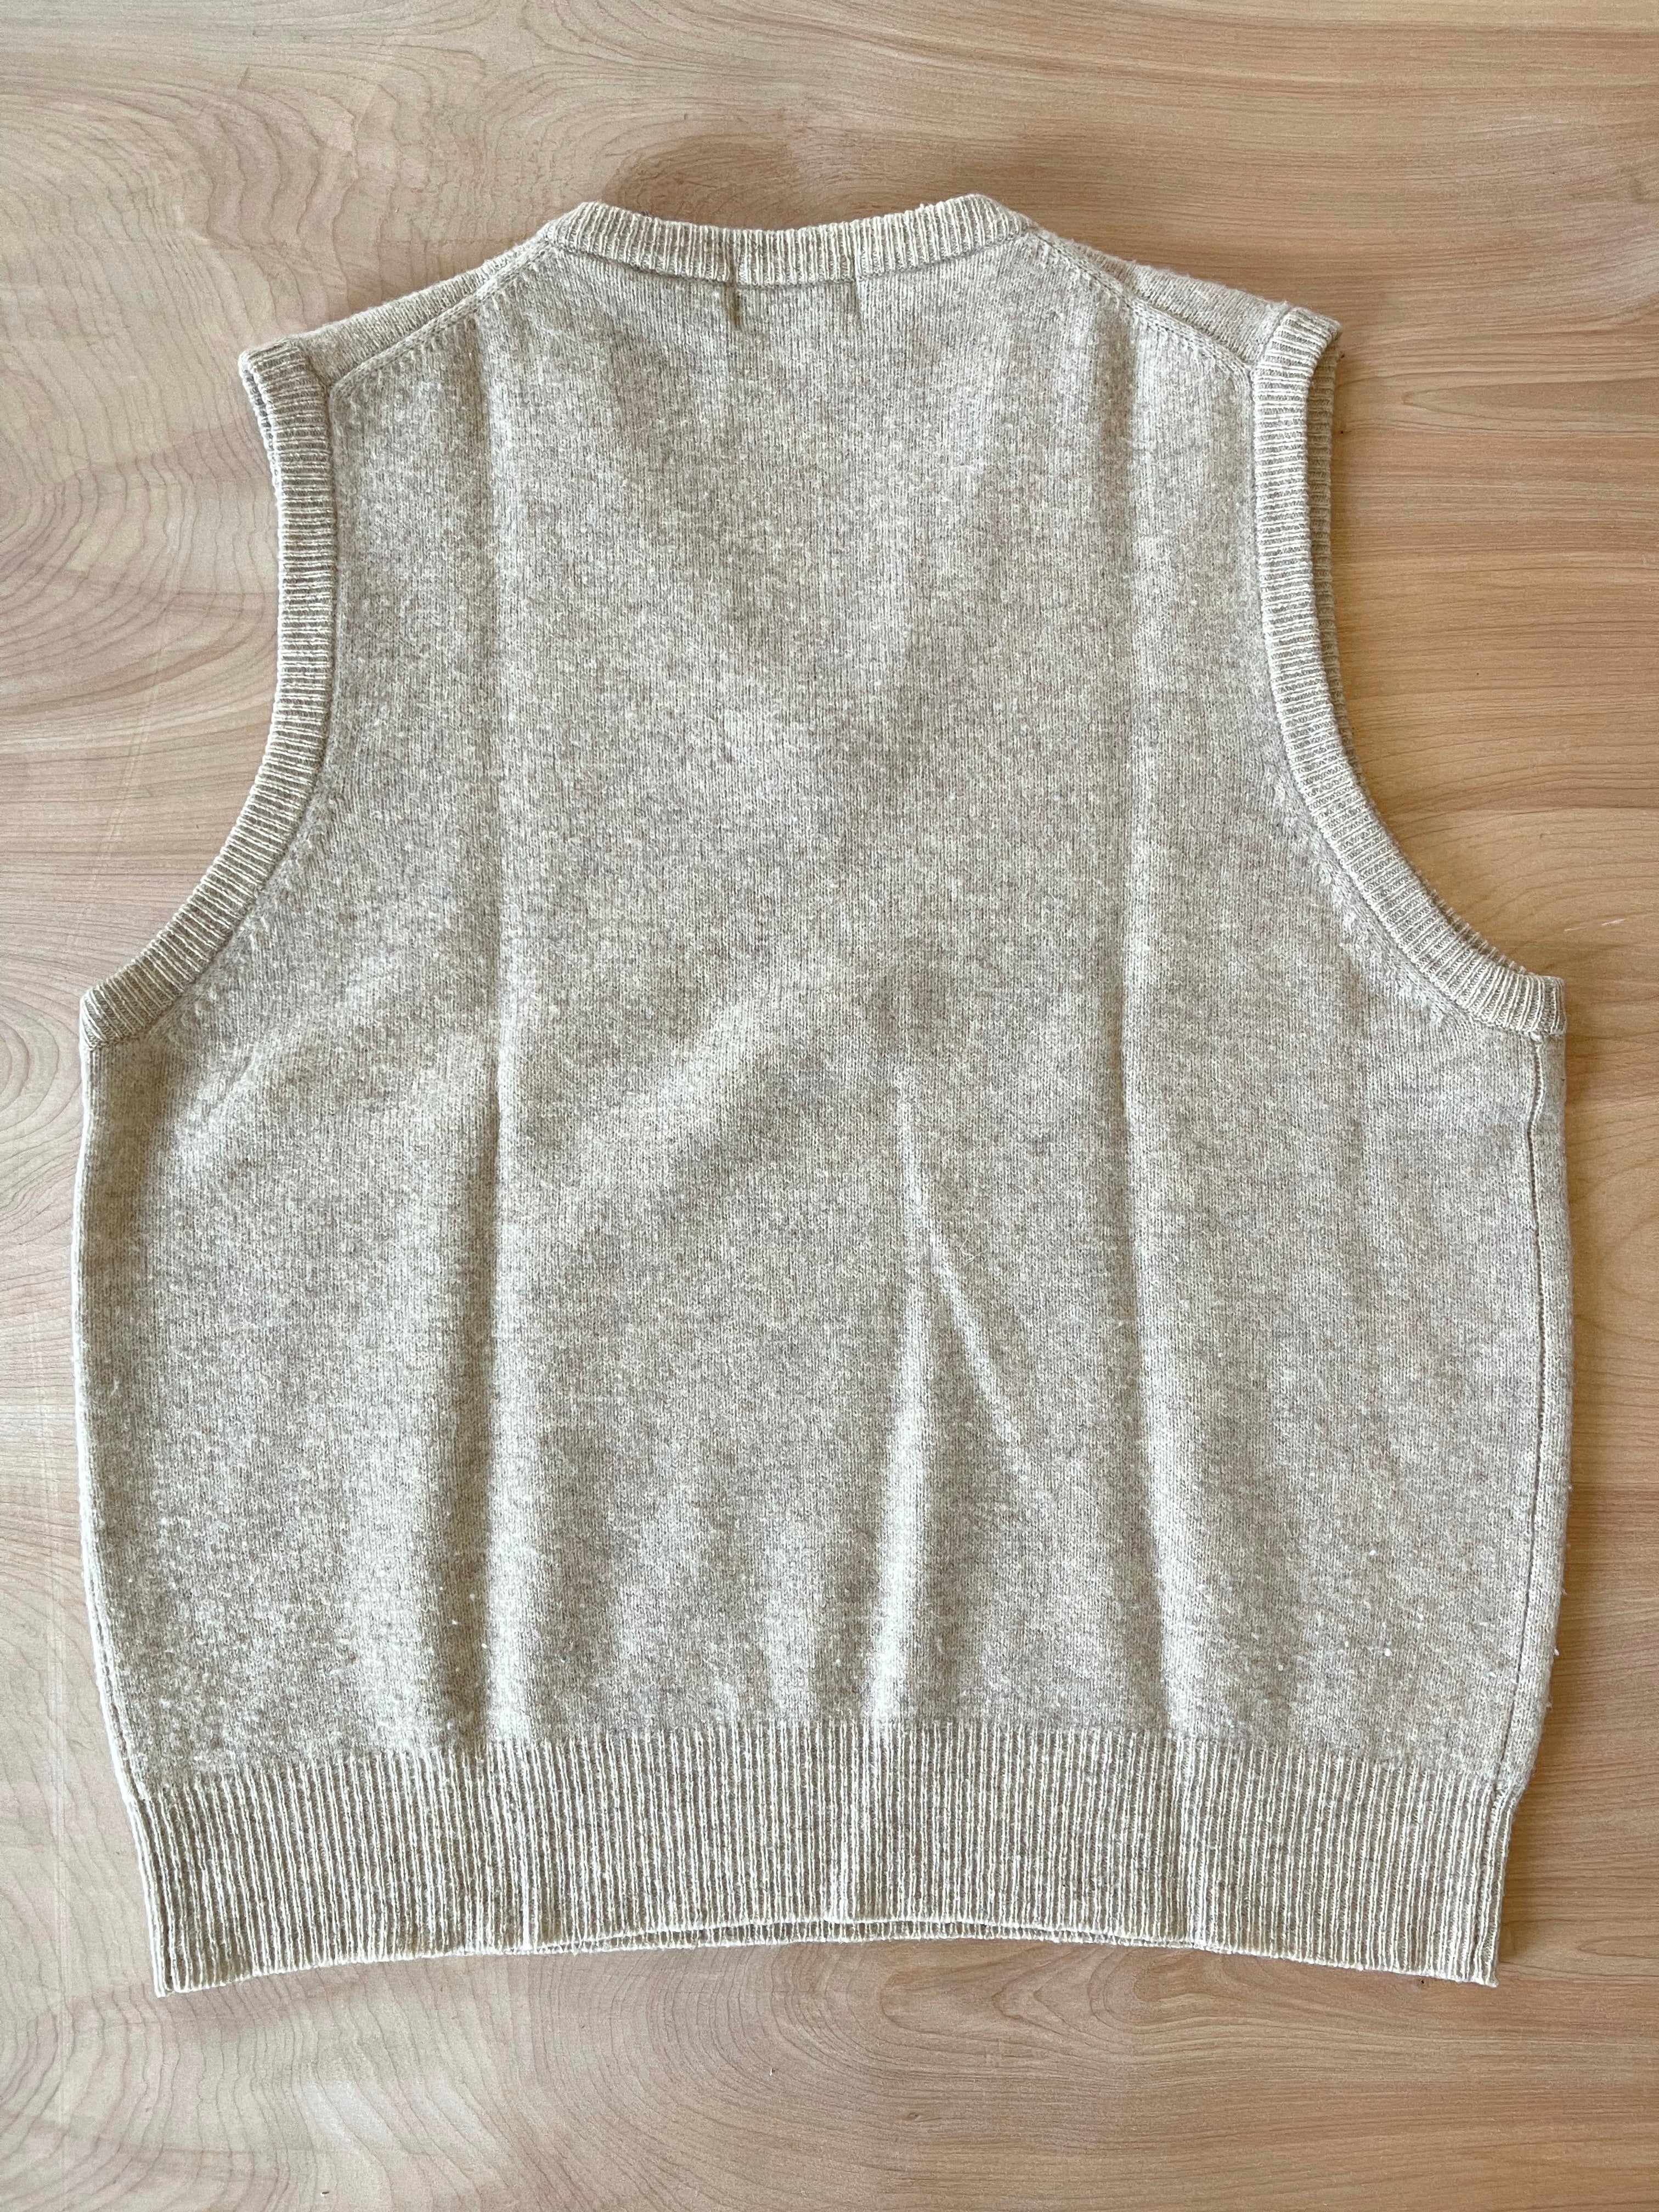 Just That Simple Sweater Vest